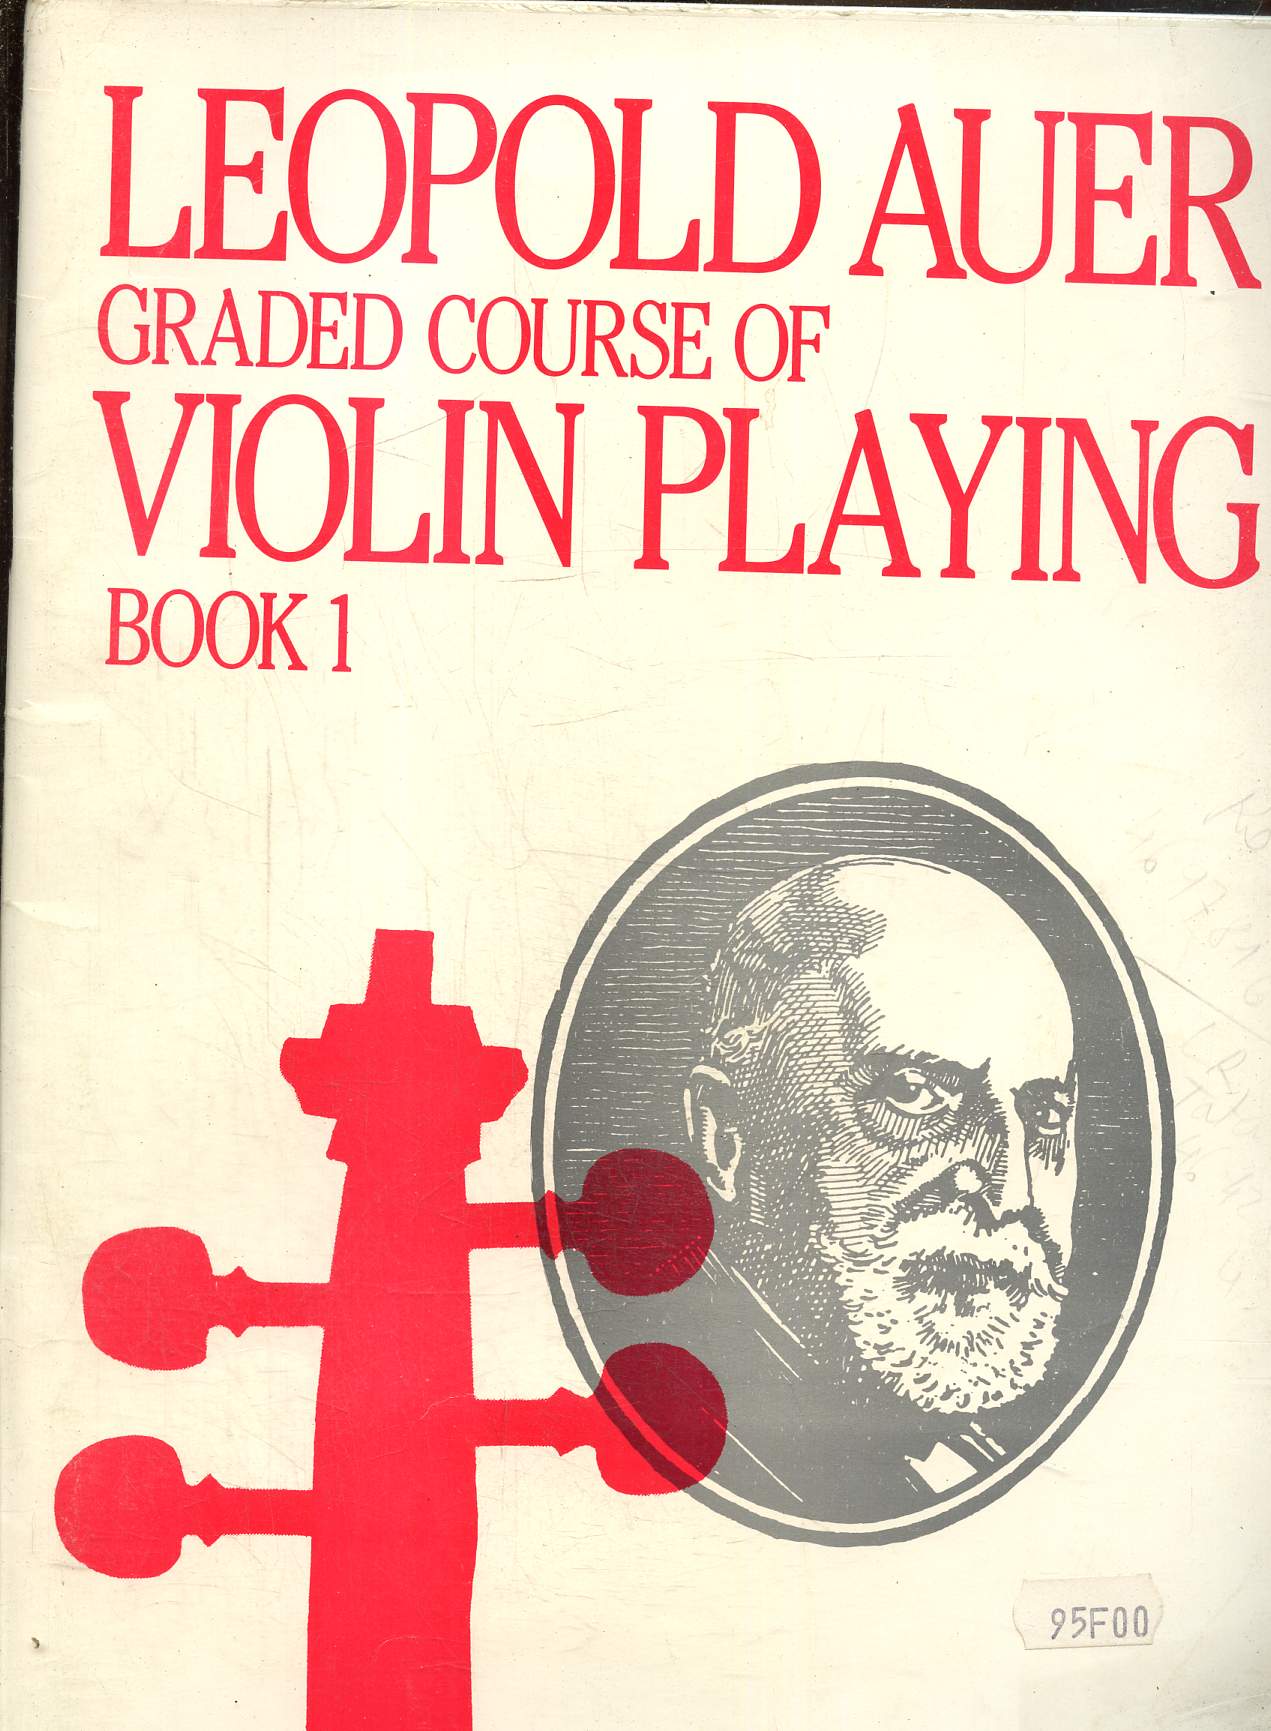 Graded course of violon playing- Book 1